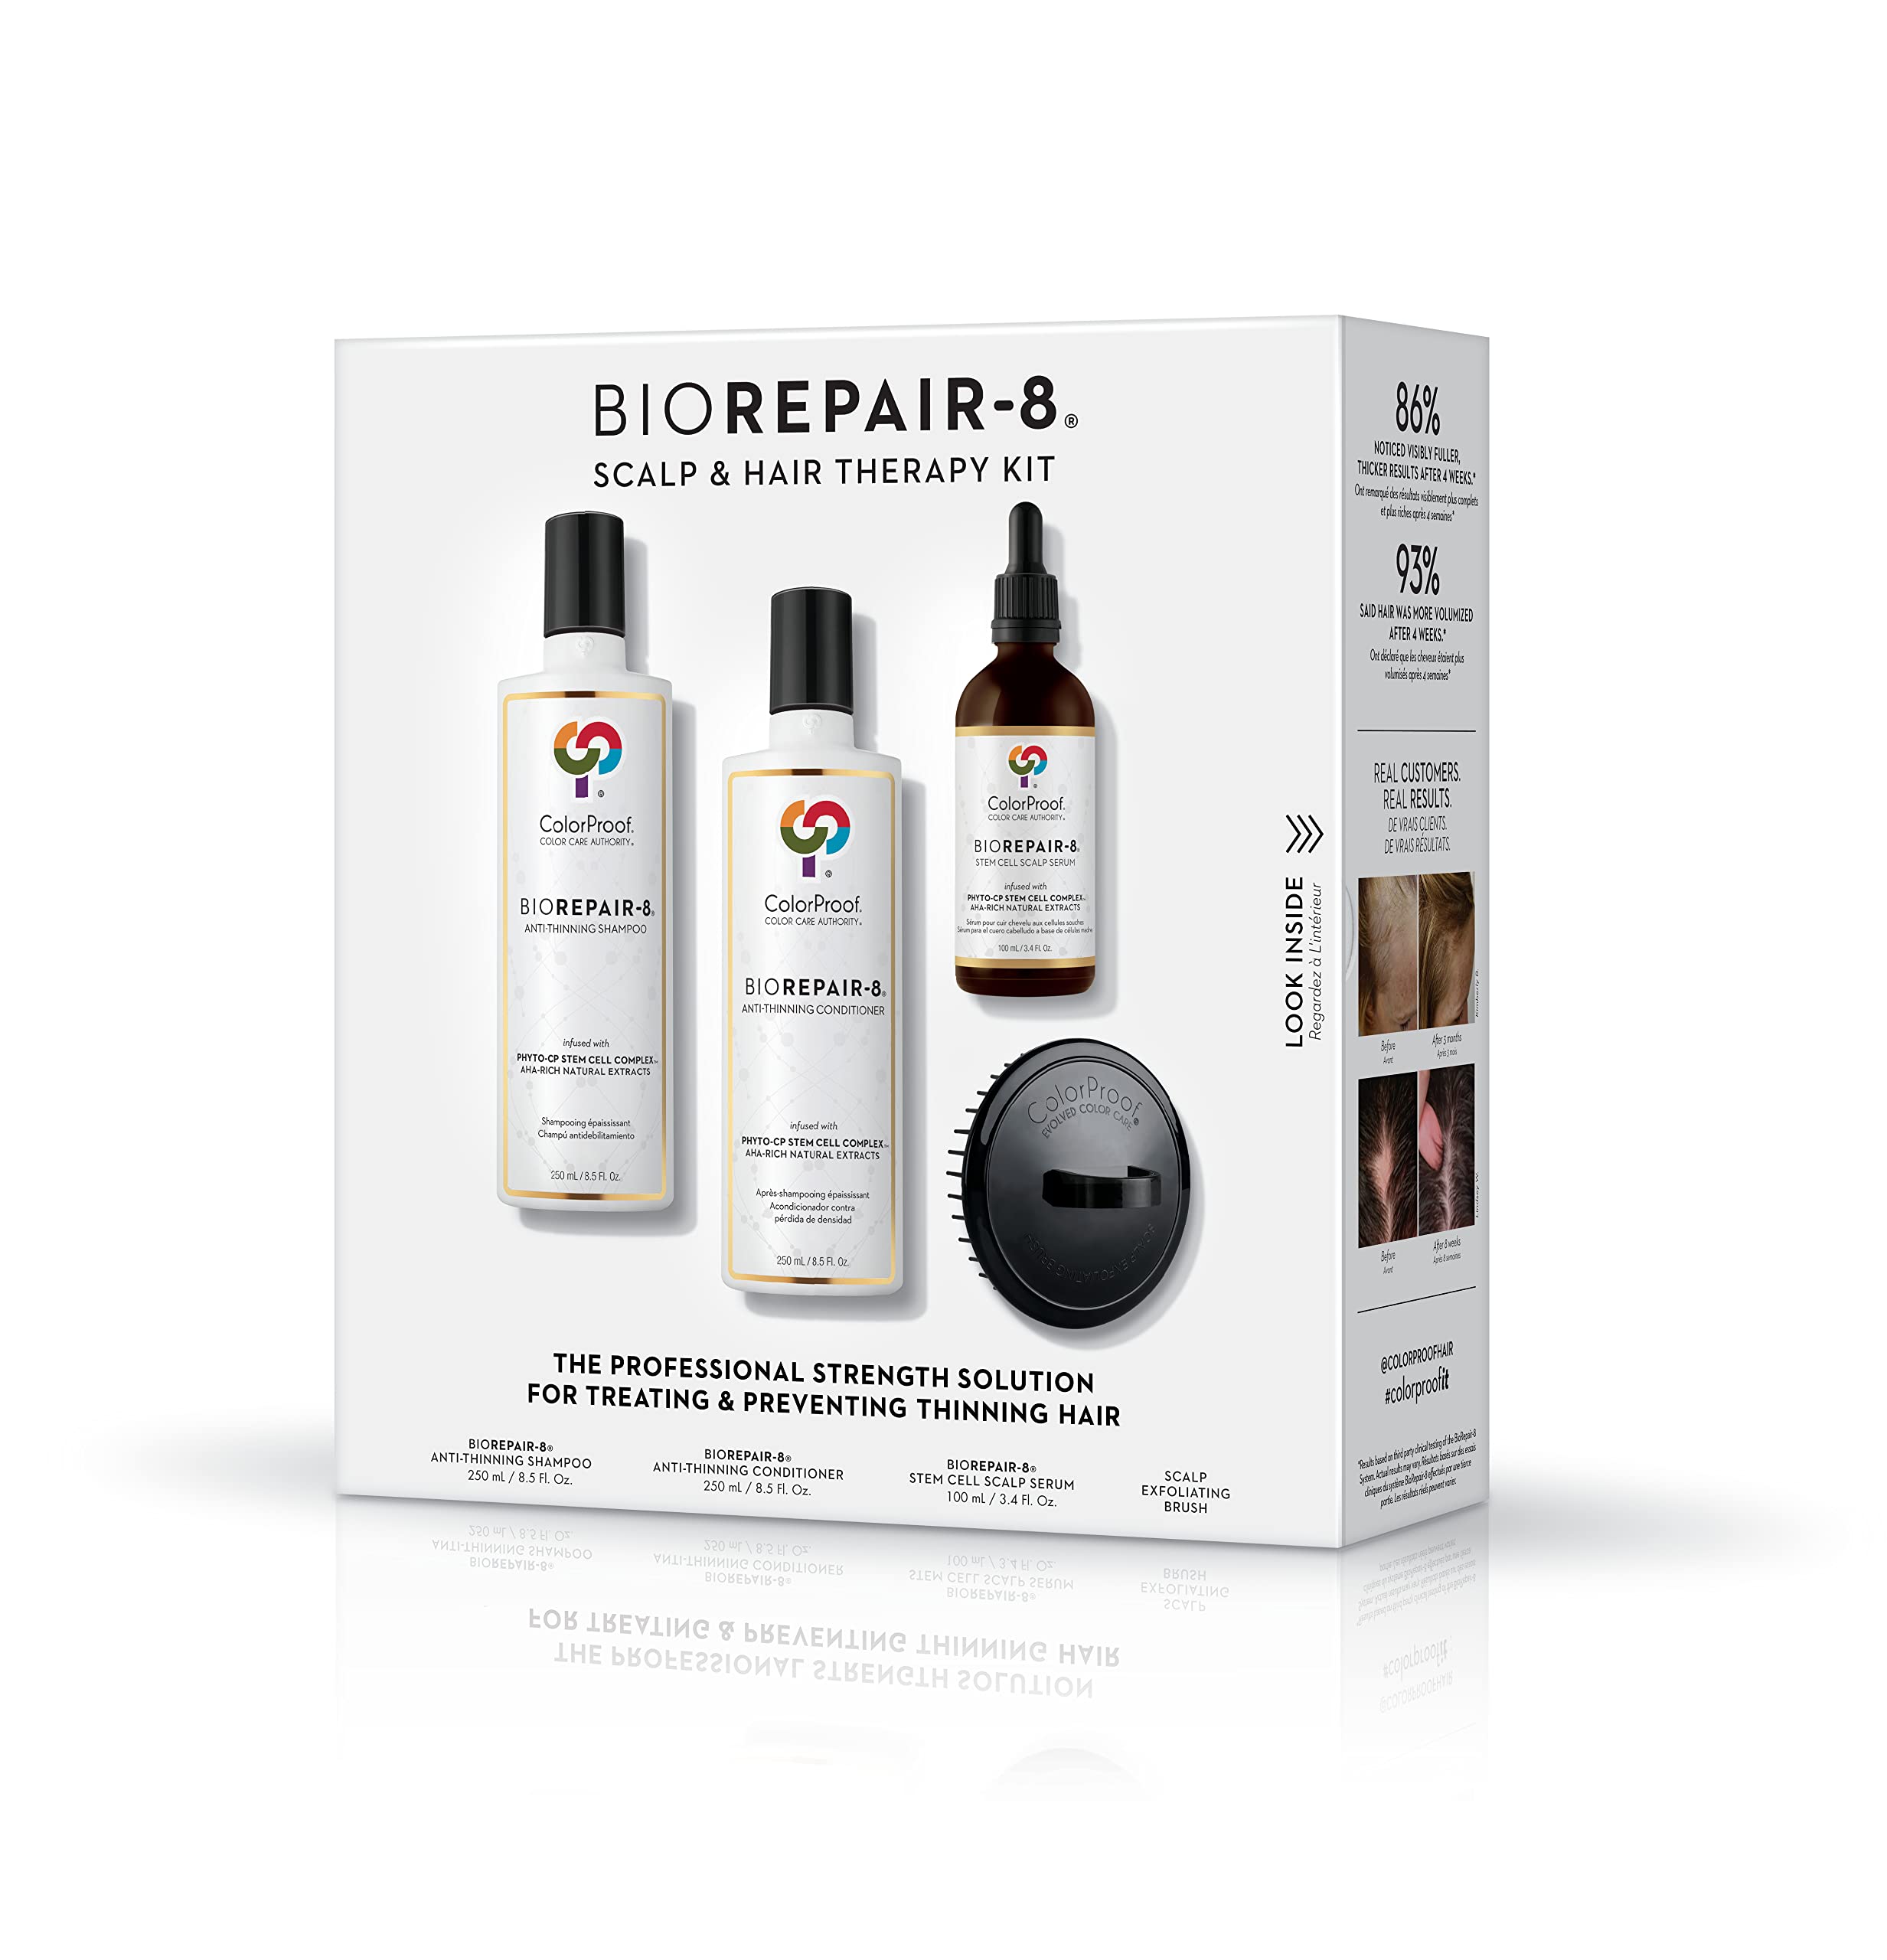 ColorProof BioRepair-8 Anti-Aging Scalp & Hair Therapy Retail Kit, for Hair Loss: Anti-Thinning RegiMen for Men and Women, Natural, Drug-Free, Hair Loss Prevention Treatment